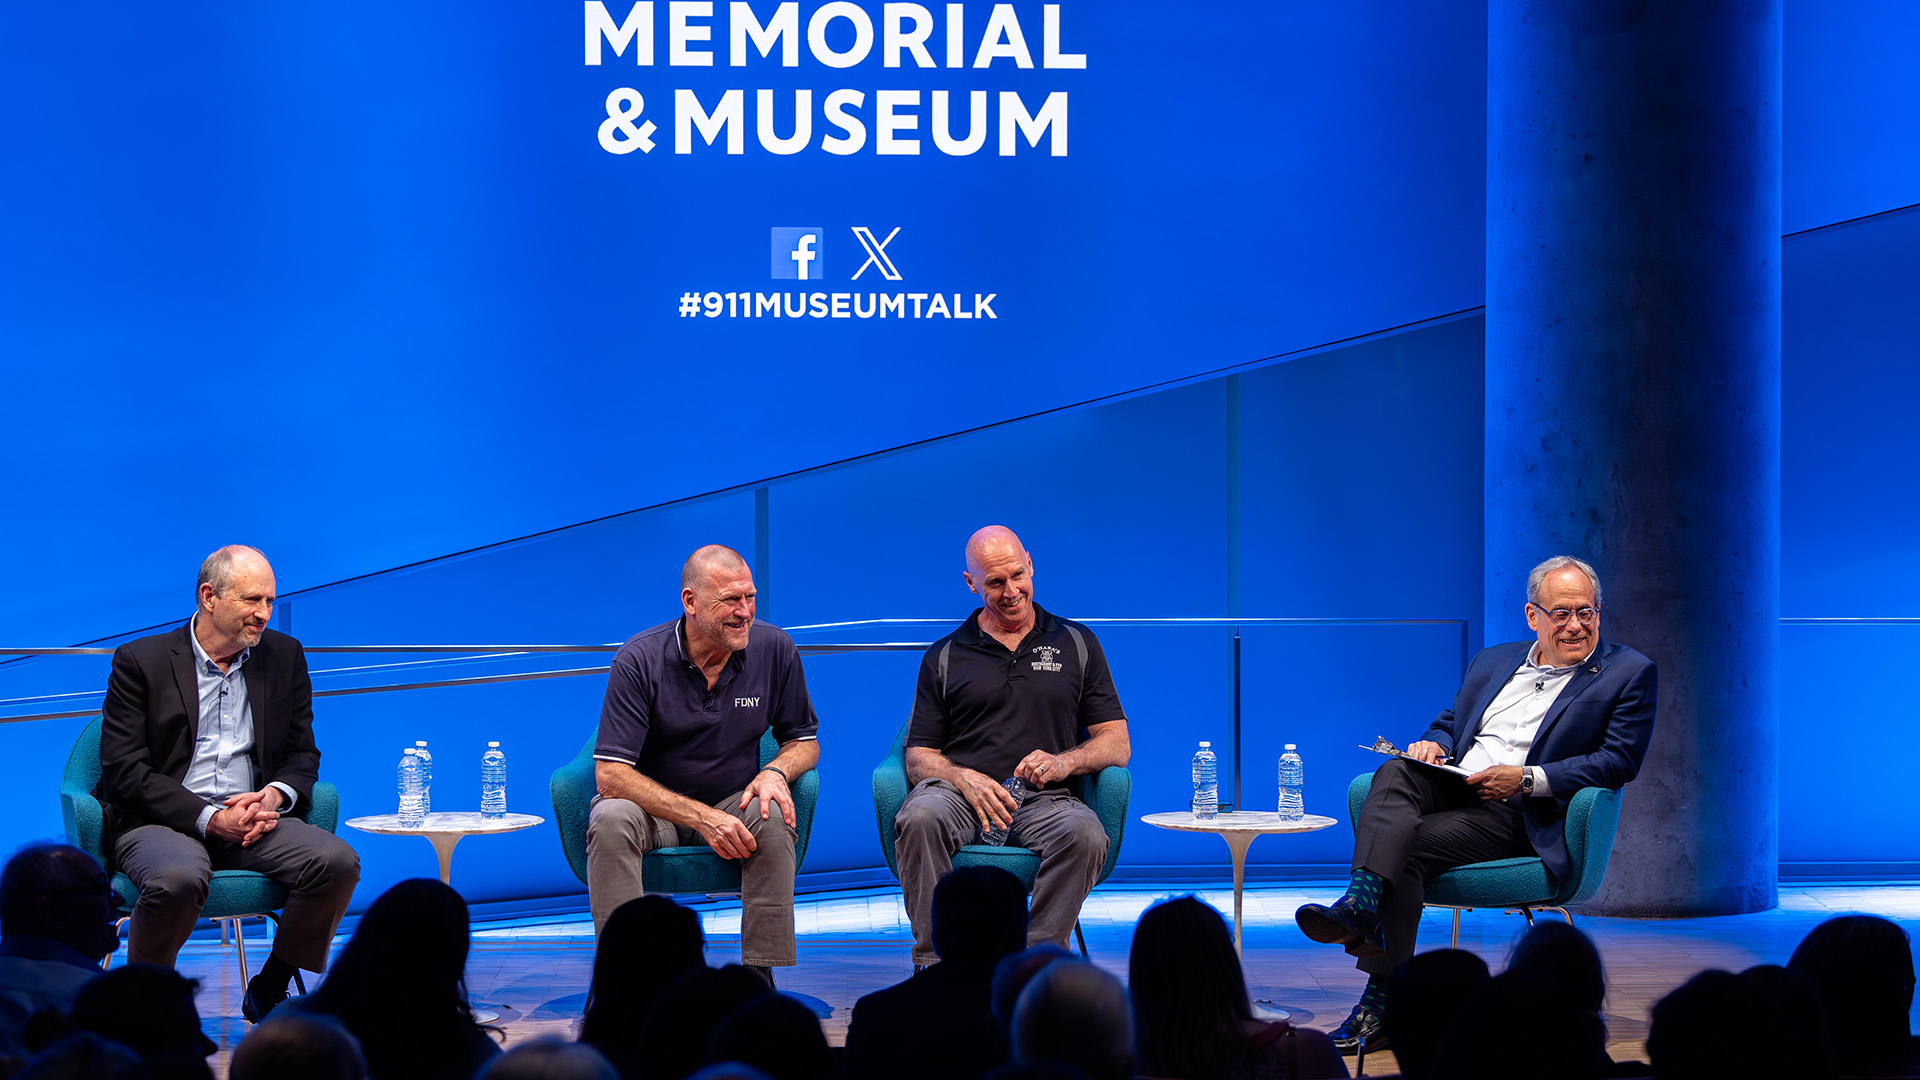 Four speakers sitting on stage, in front of the 9/11 Memorial and Museum #911MuseumTalk logo.